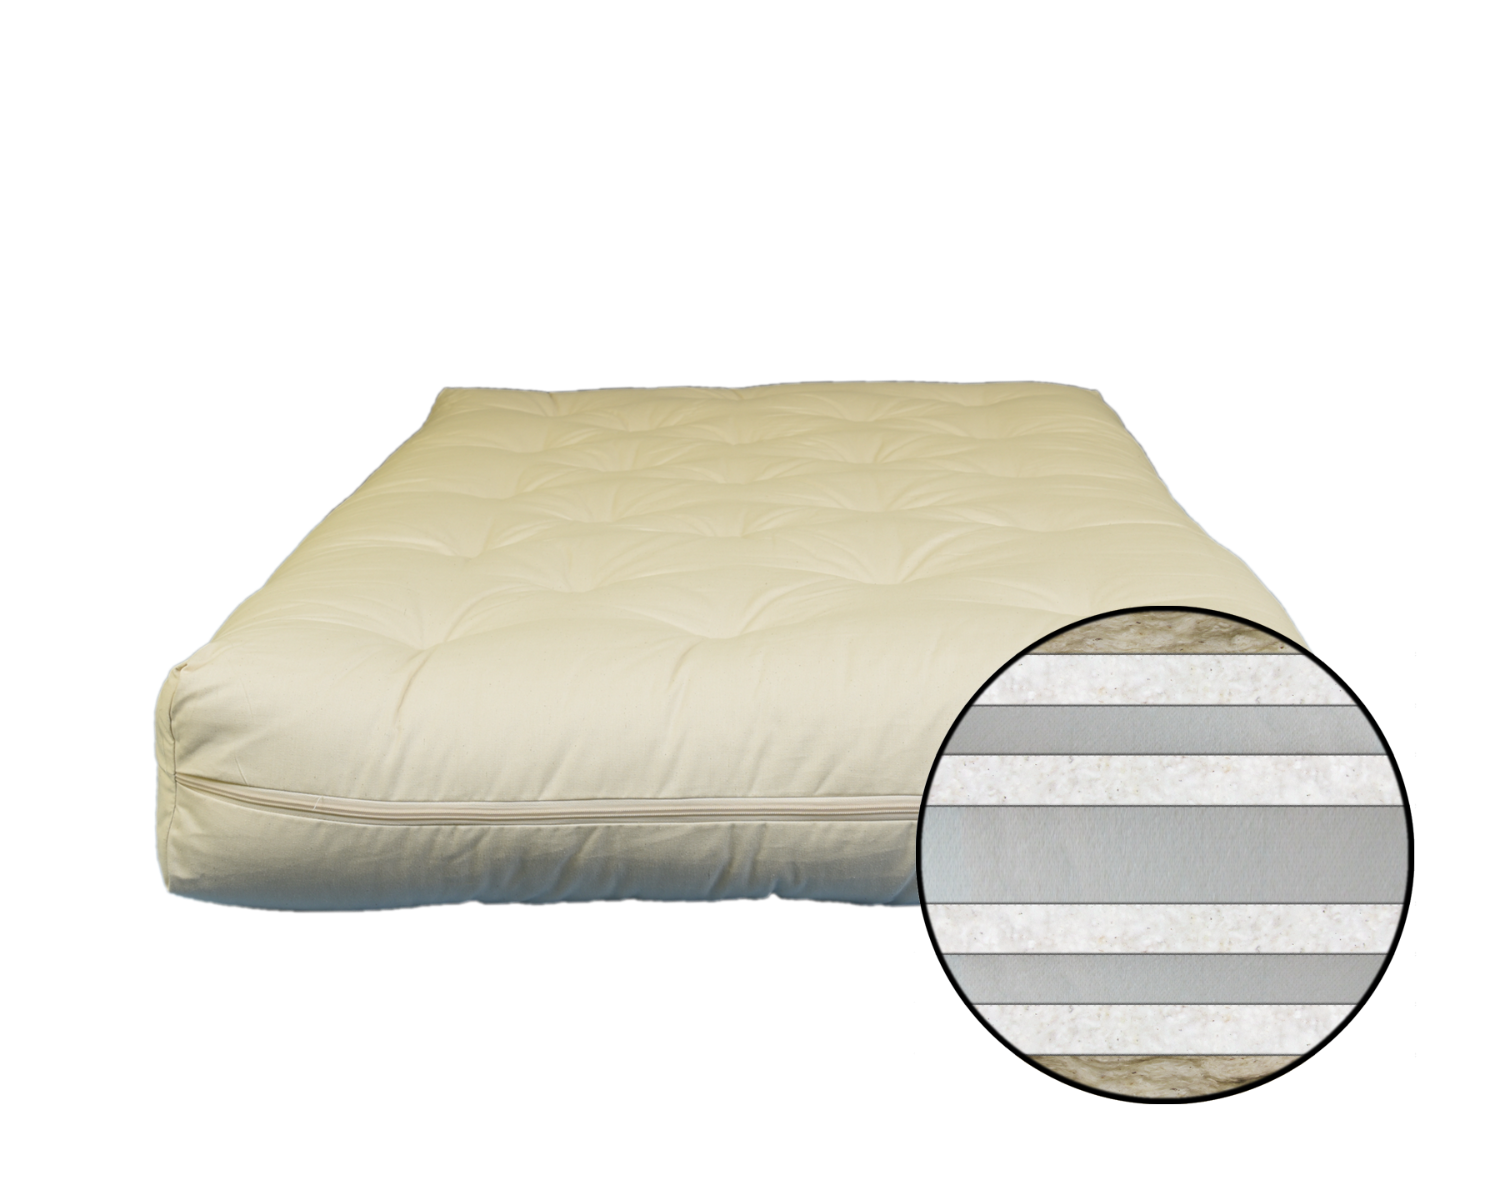 Wool Futon Cover For Futon Couch, Wool Cover For Futon Bed